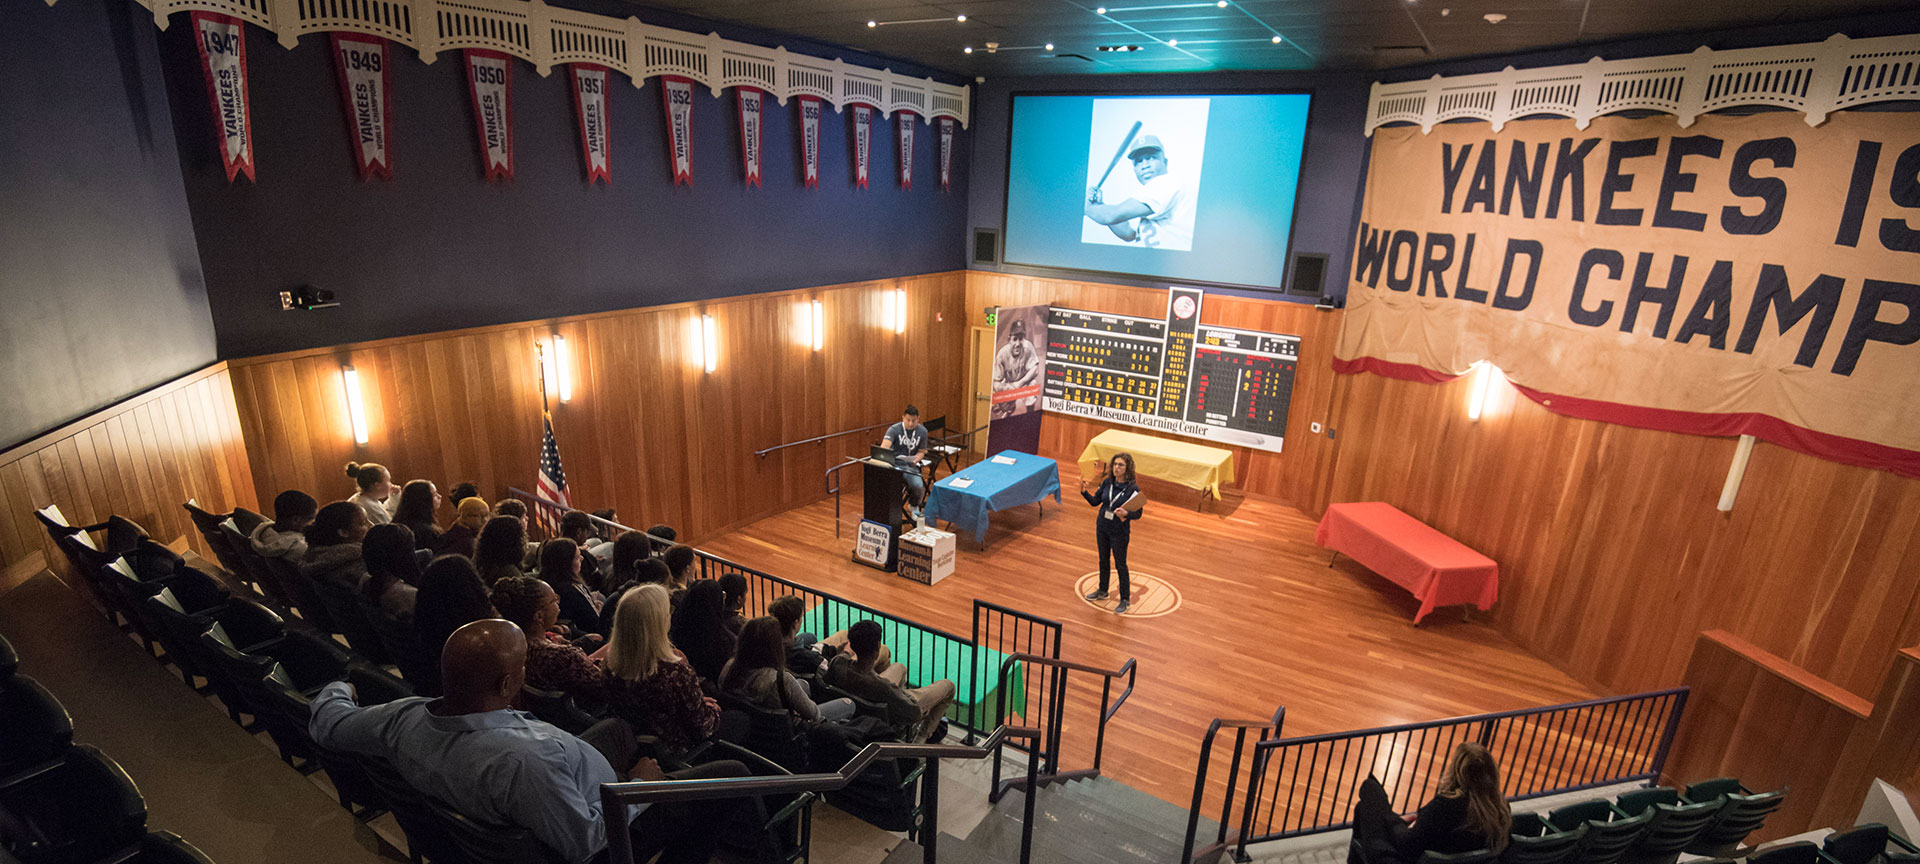 A guide talking to an audience in the Museum's auditorium with an image of Jackie Robinson on the screen behind her